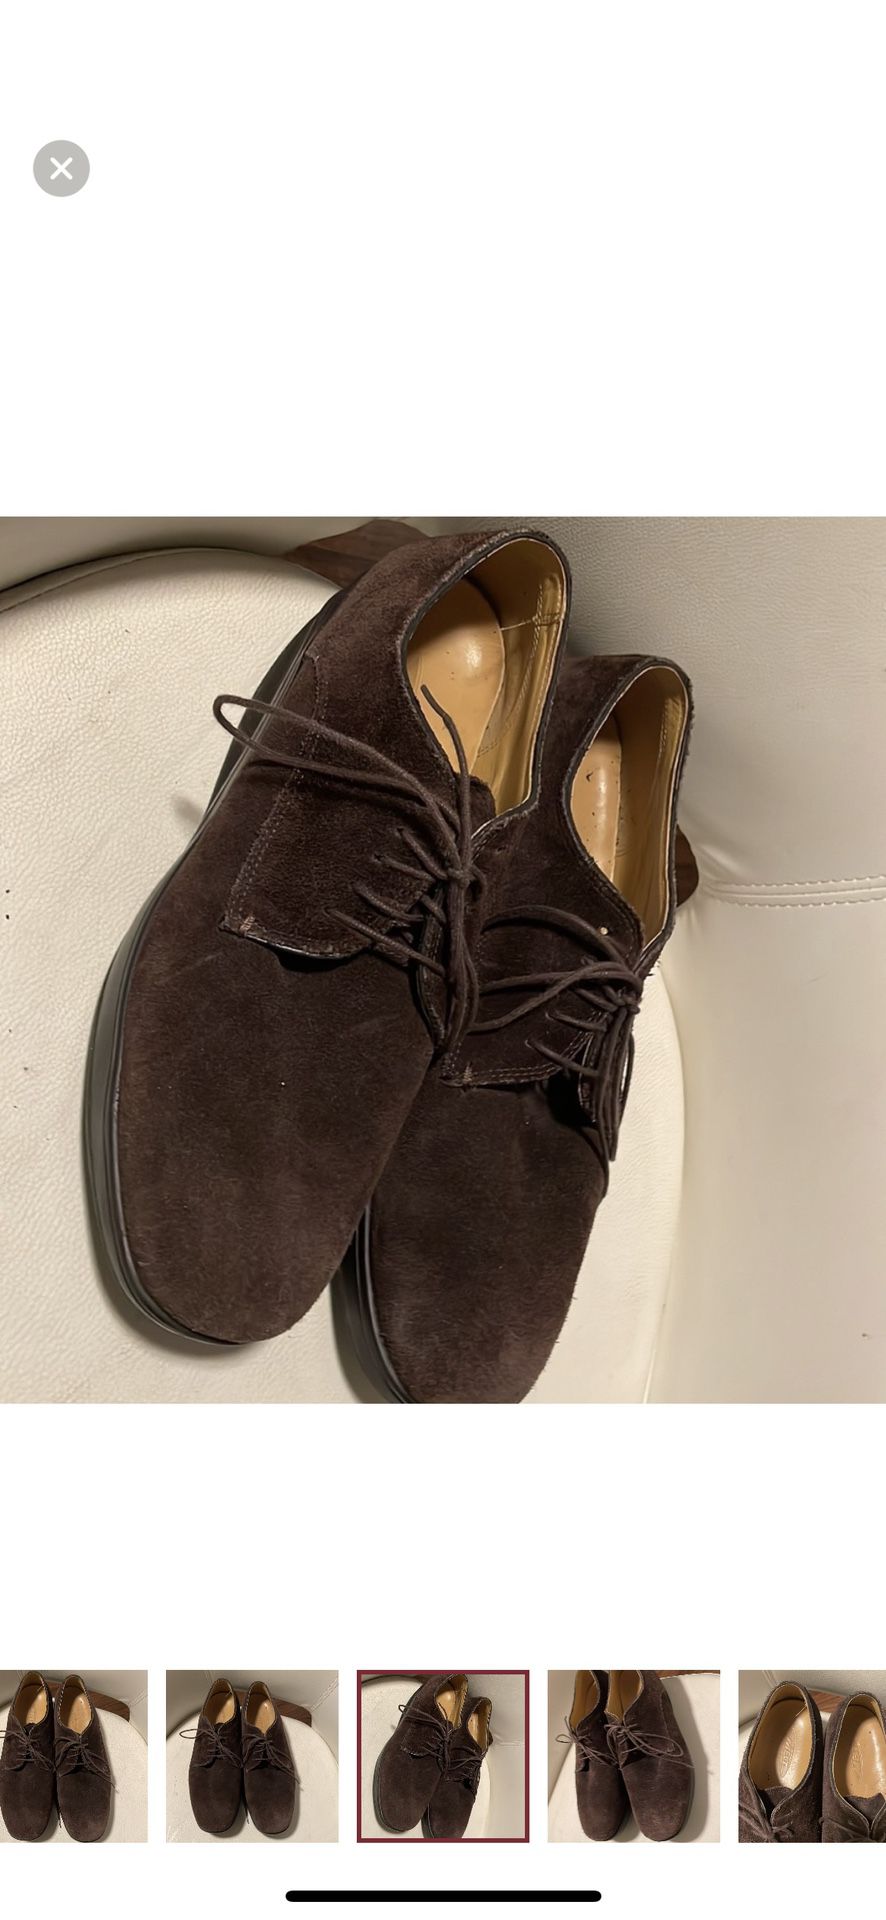 MBT Loafers Size 10.5 for Sale in Sacramento, CA - OfferUp